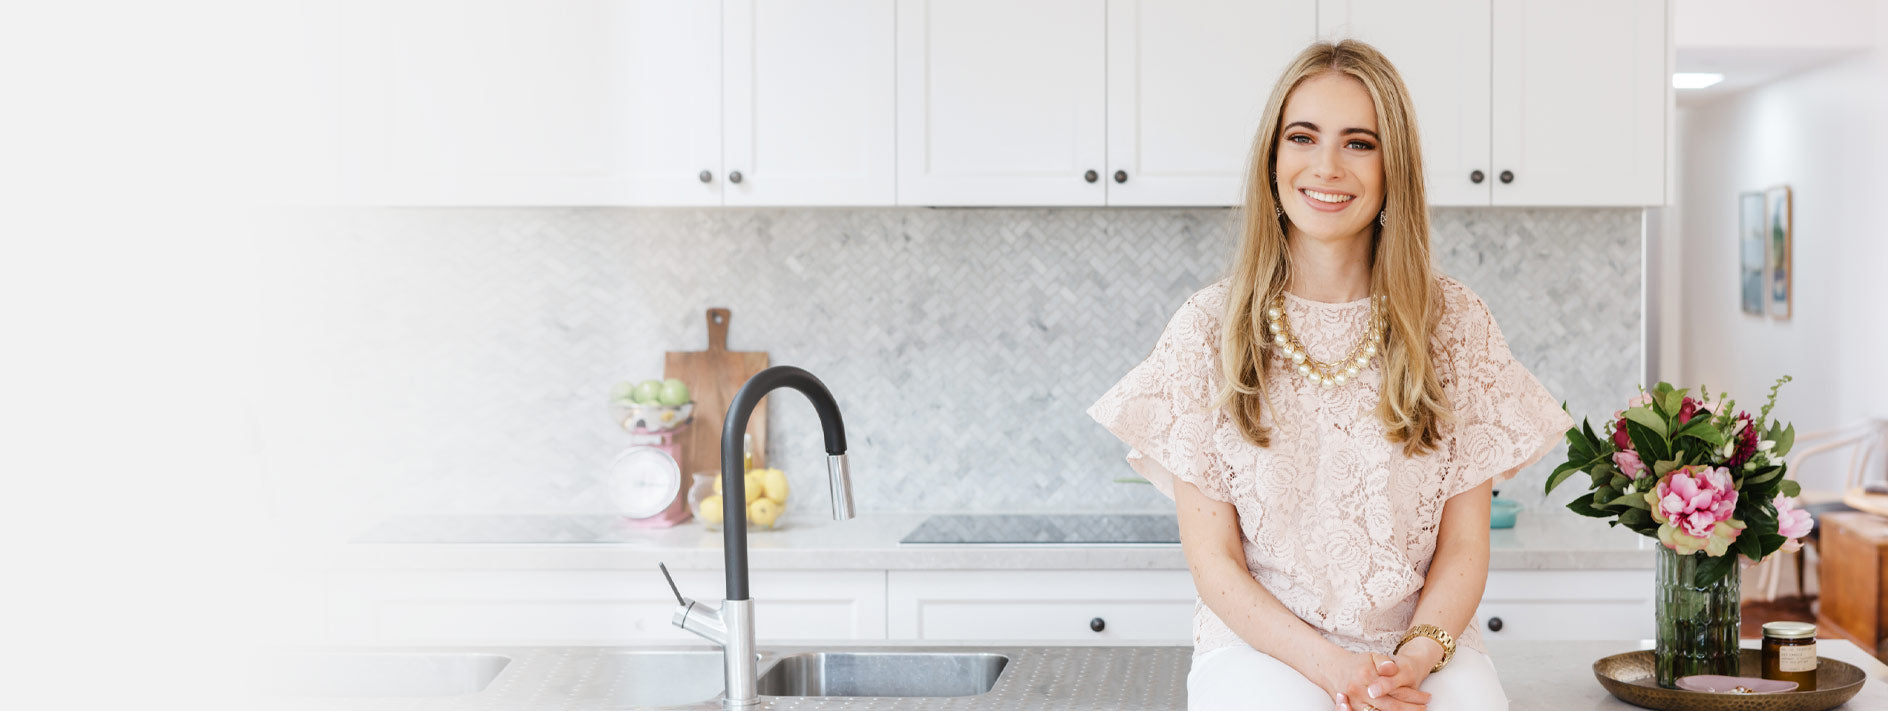 Blonde girl in pink top sitting on a kitchen island in front of a white kitchen with marble wall tiles